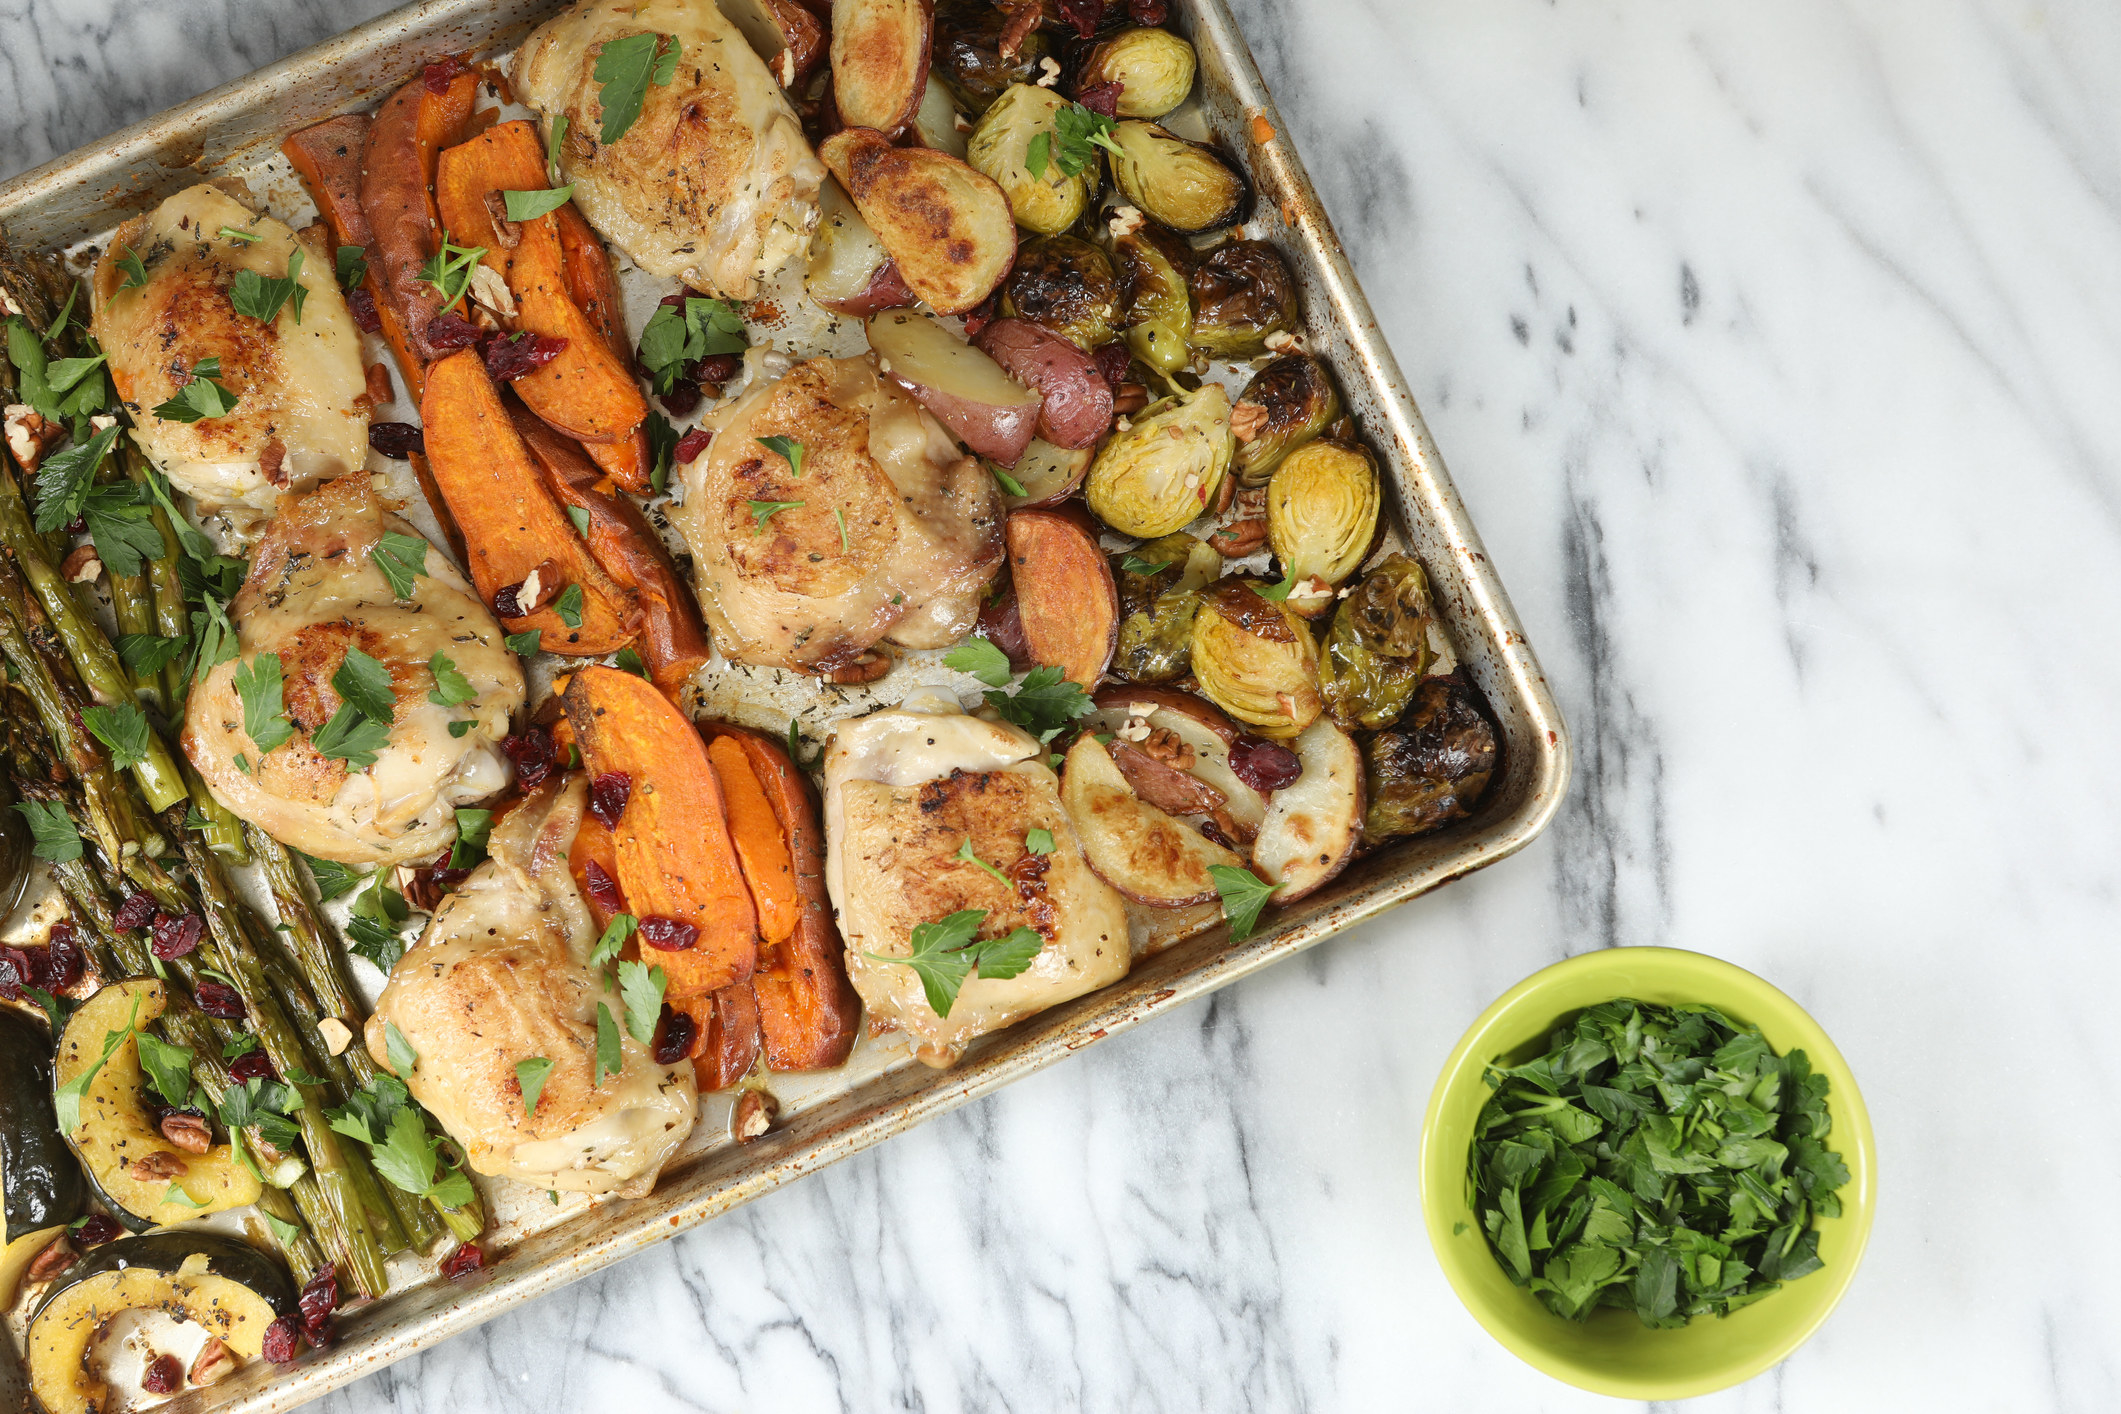 Sheet pan chicken with lots of vegetables and a side of fresh herbs.